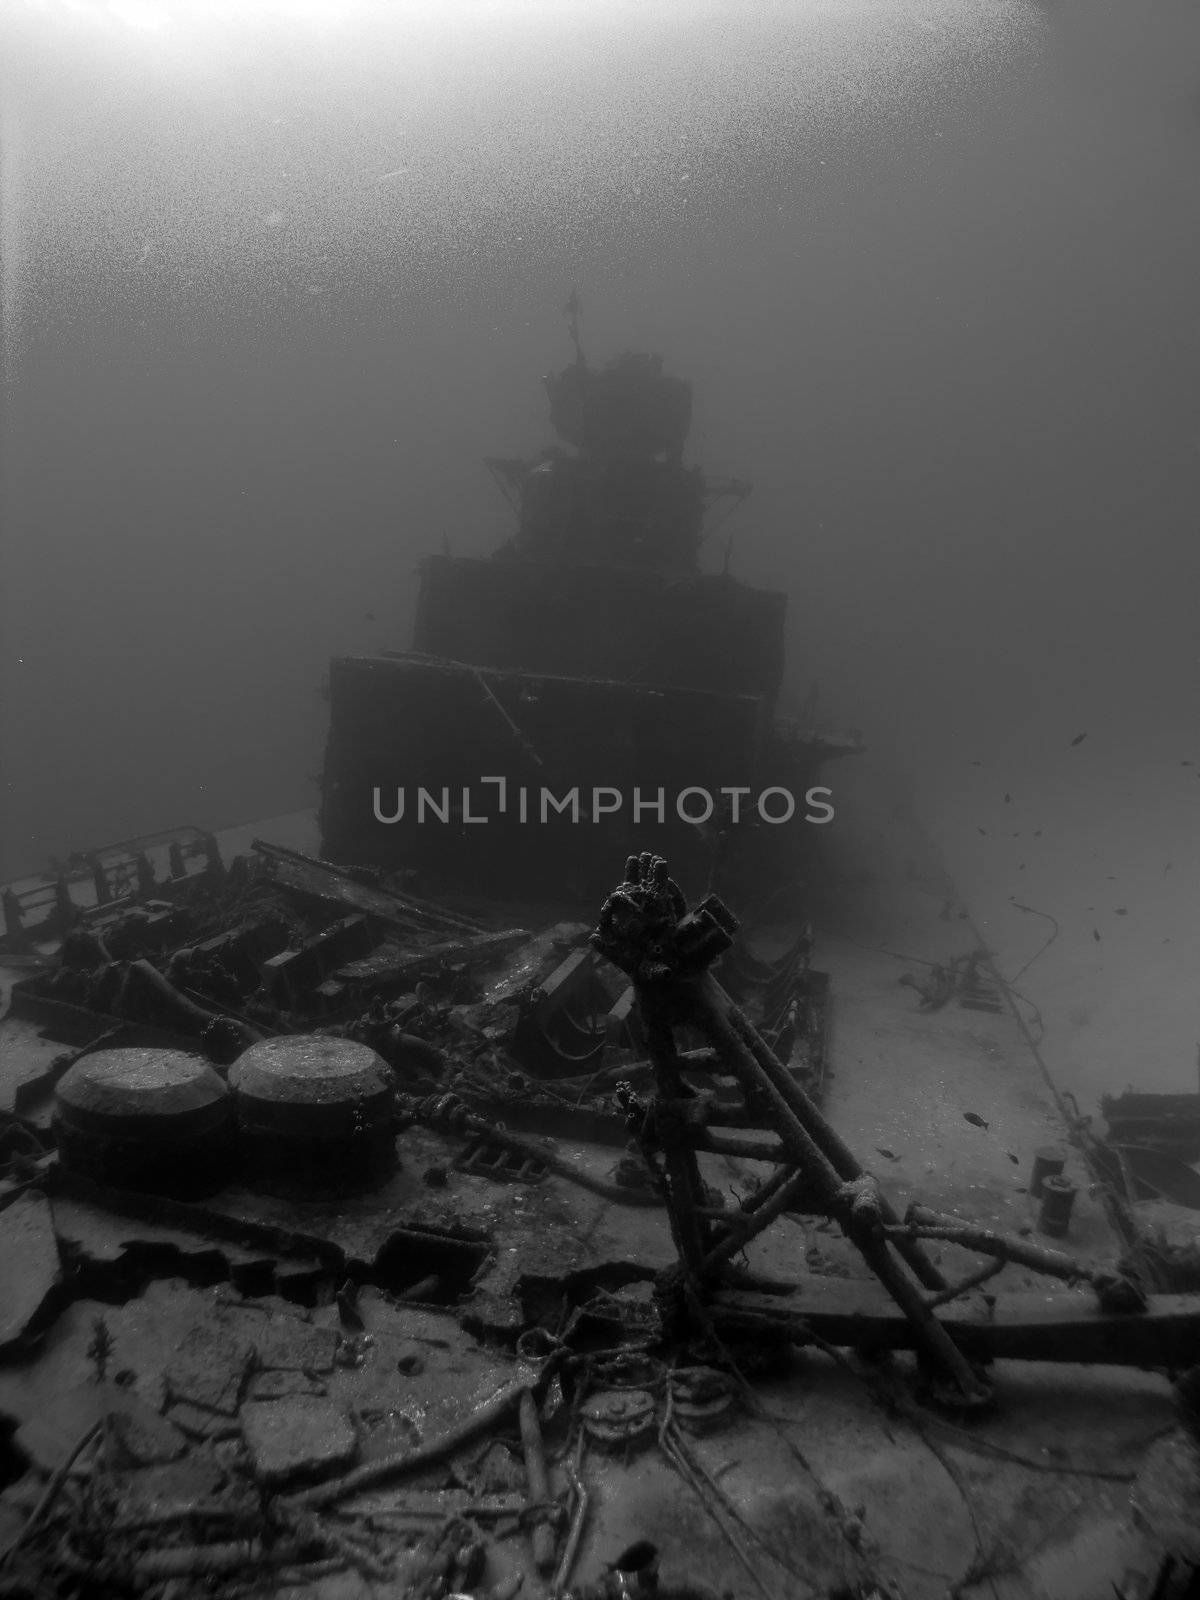 A Black and White shot of the Deck of a Sunken Destroyer